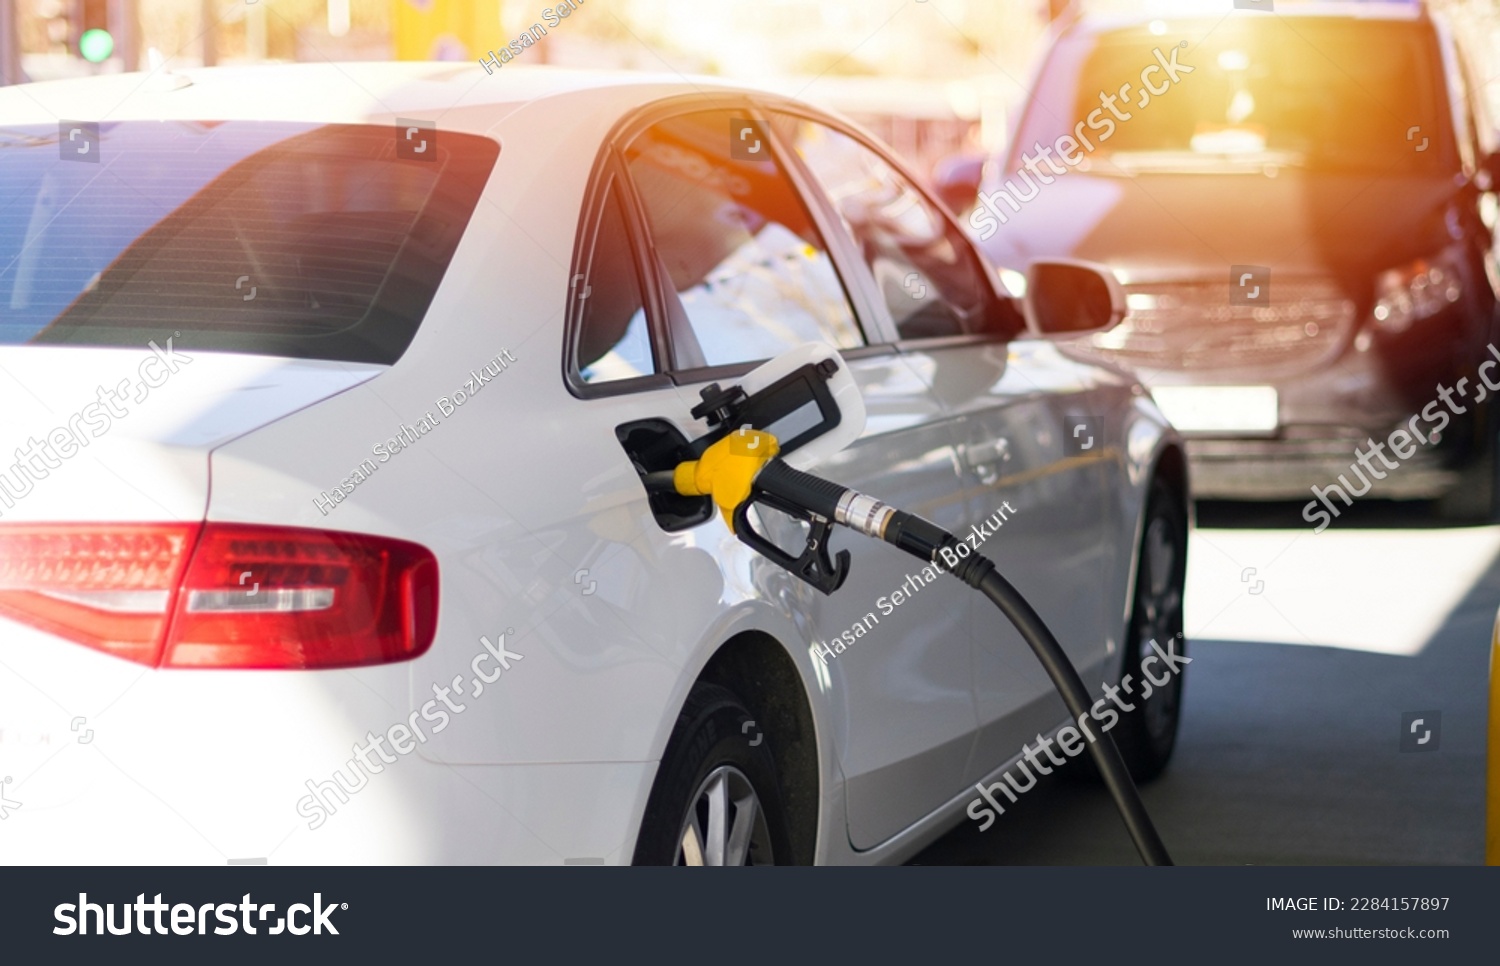 Refuel cars at the fuel pump. The driver hands, refuel and pump the car's gasoline with fuel at the petrol station. Car refueling at a gas station. #2284157897